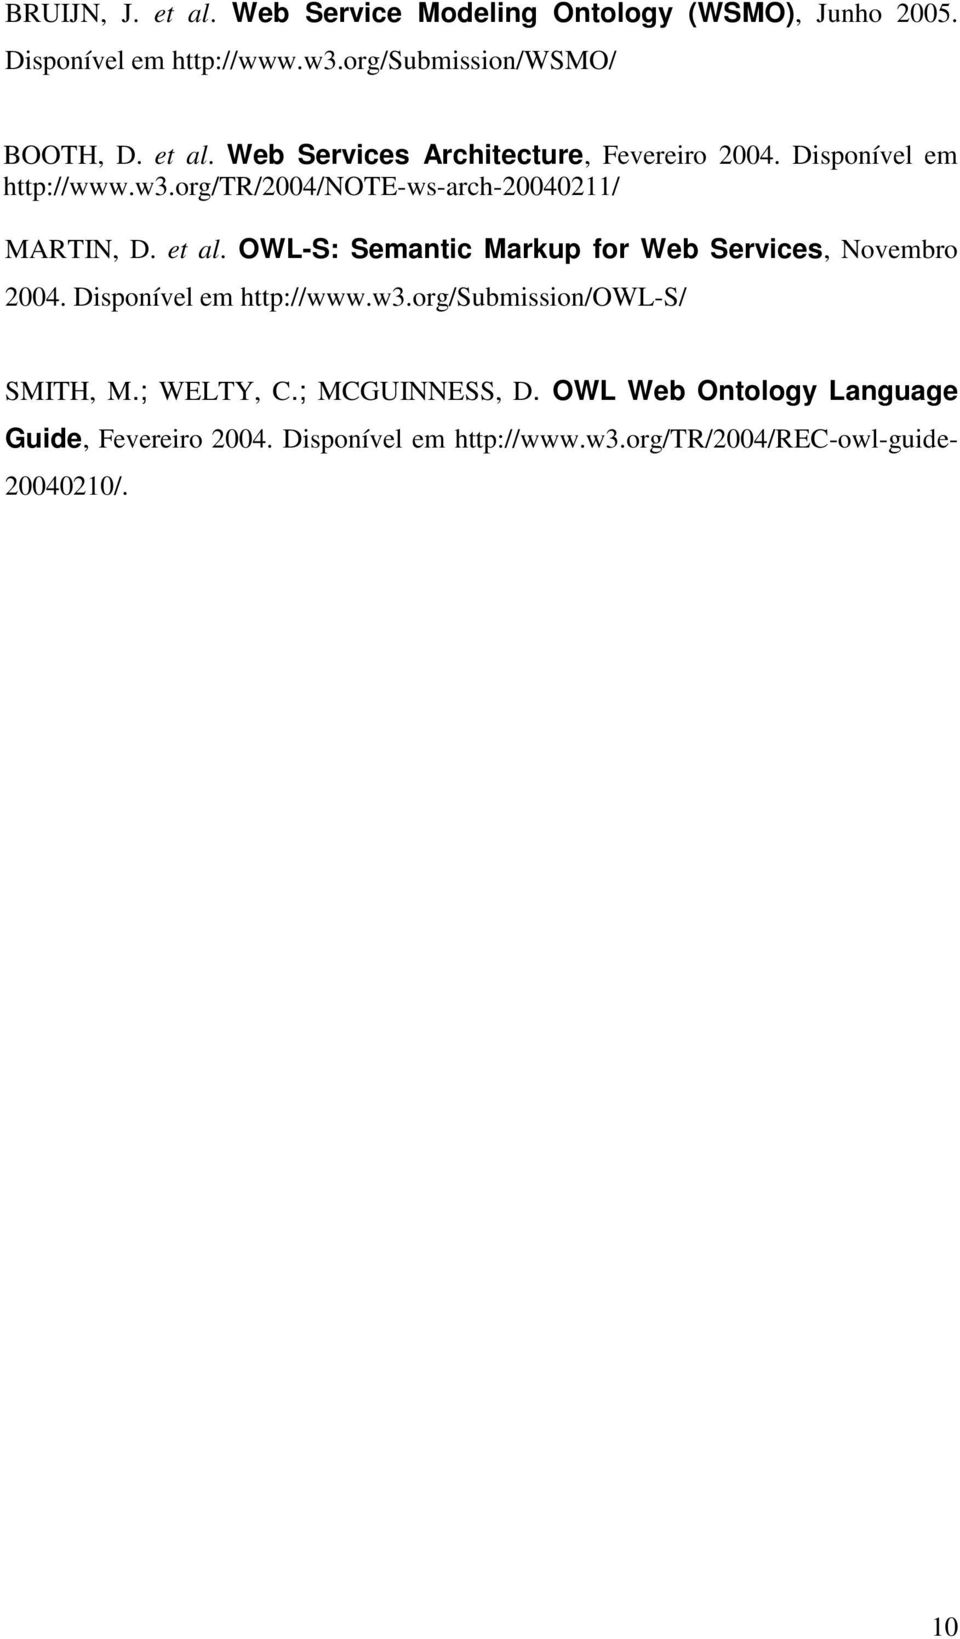 OWL-S: Semantic Markup for Web Services, Novembro 2004. Disponível em http://www.w3.org/submission/owl-s/ SMITH, M.; WELTY, C.